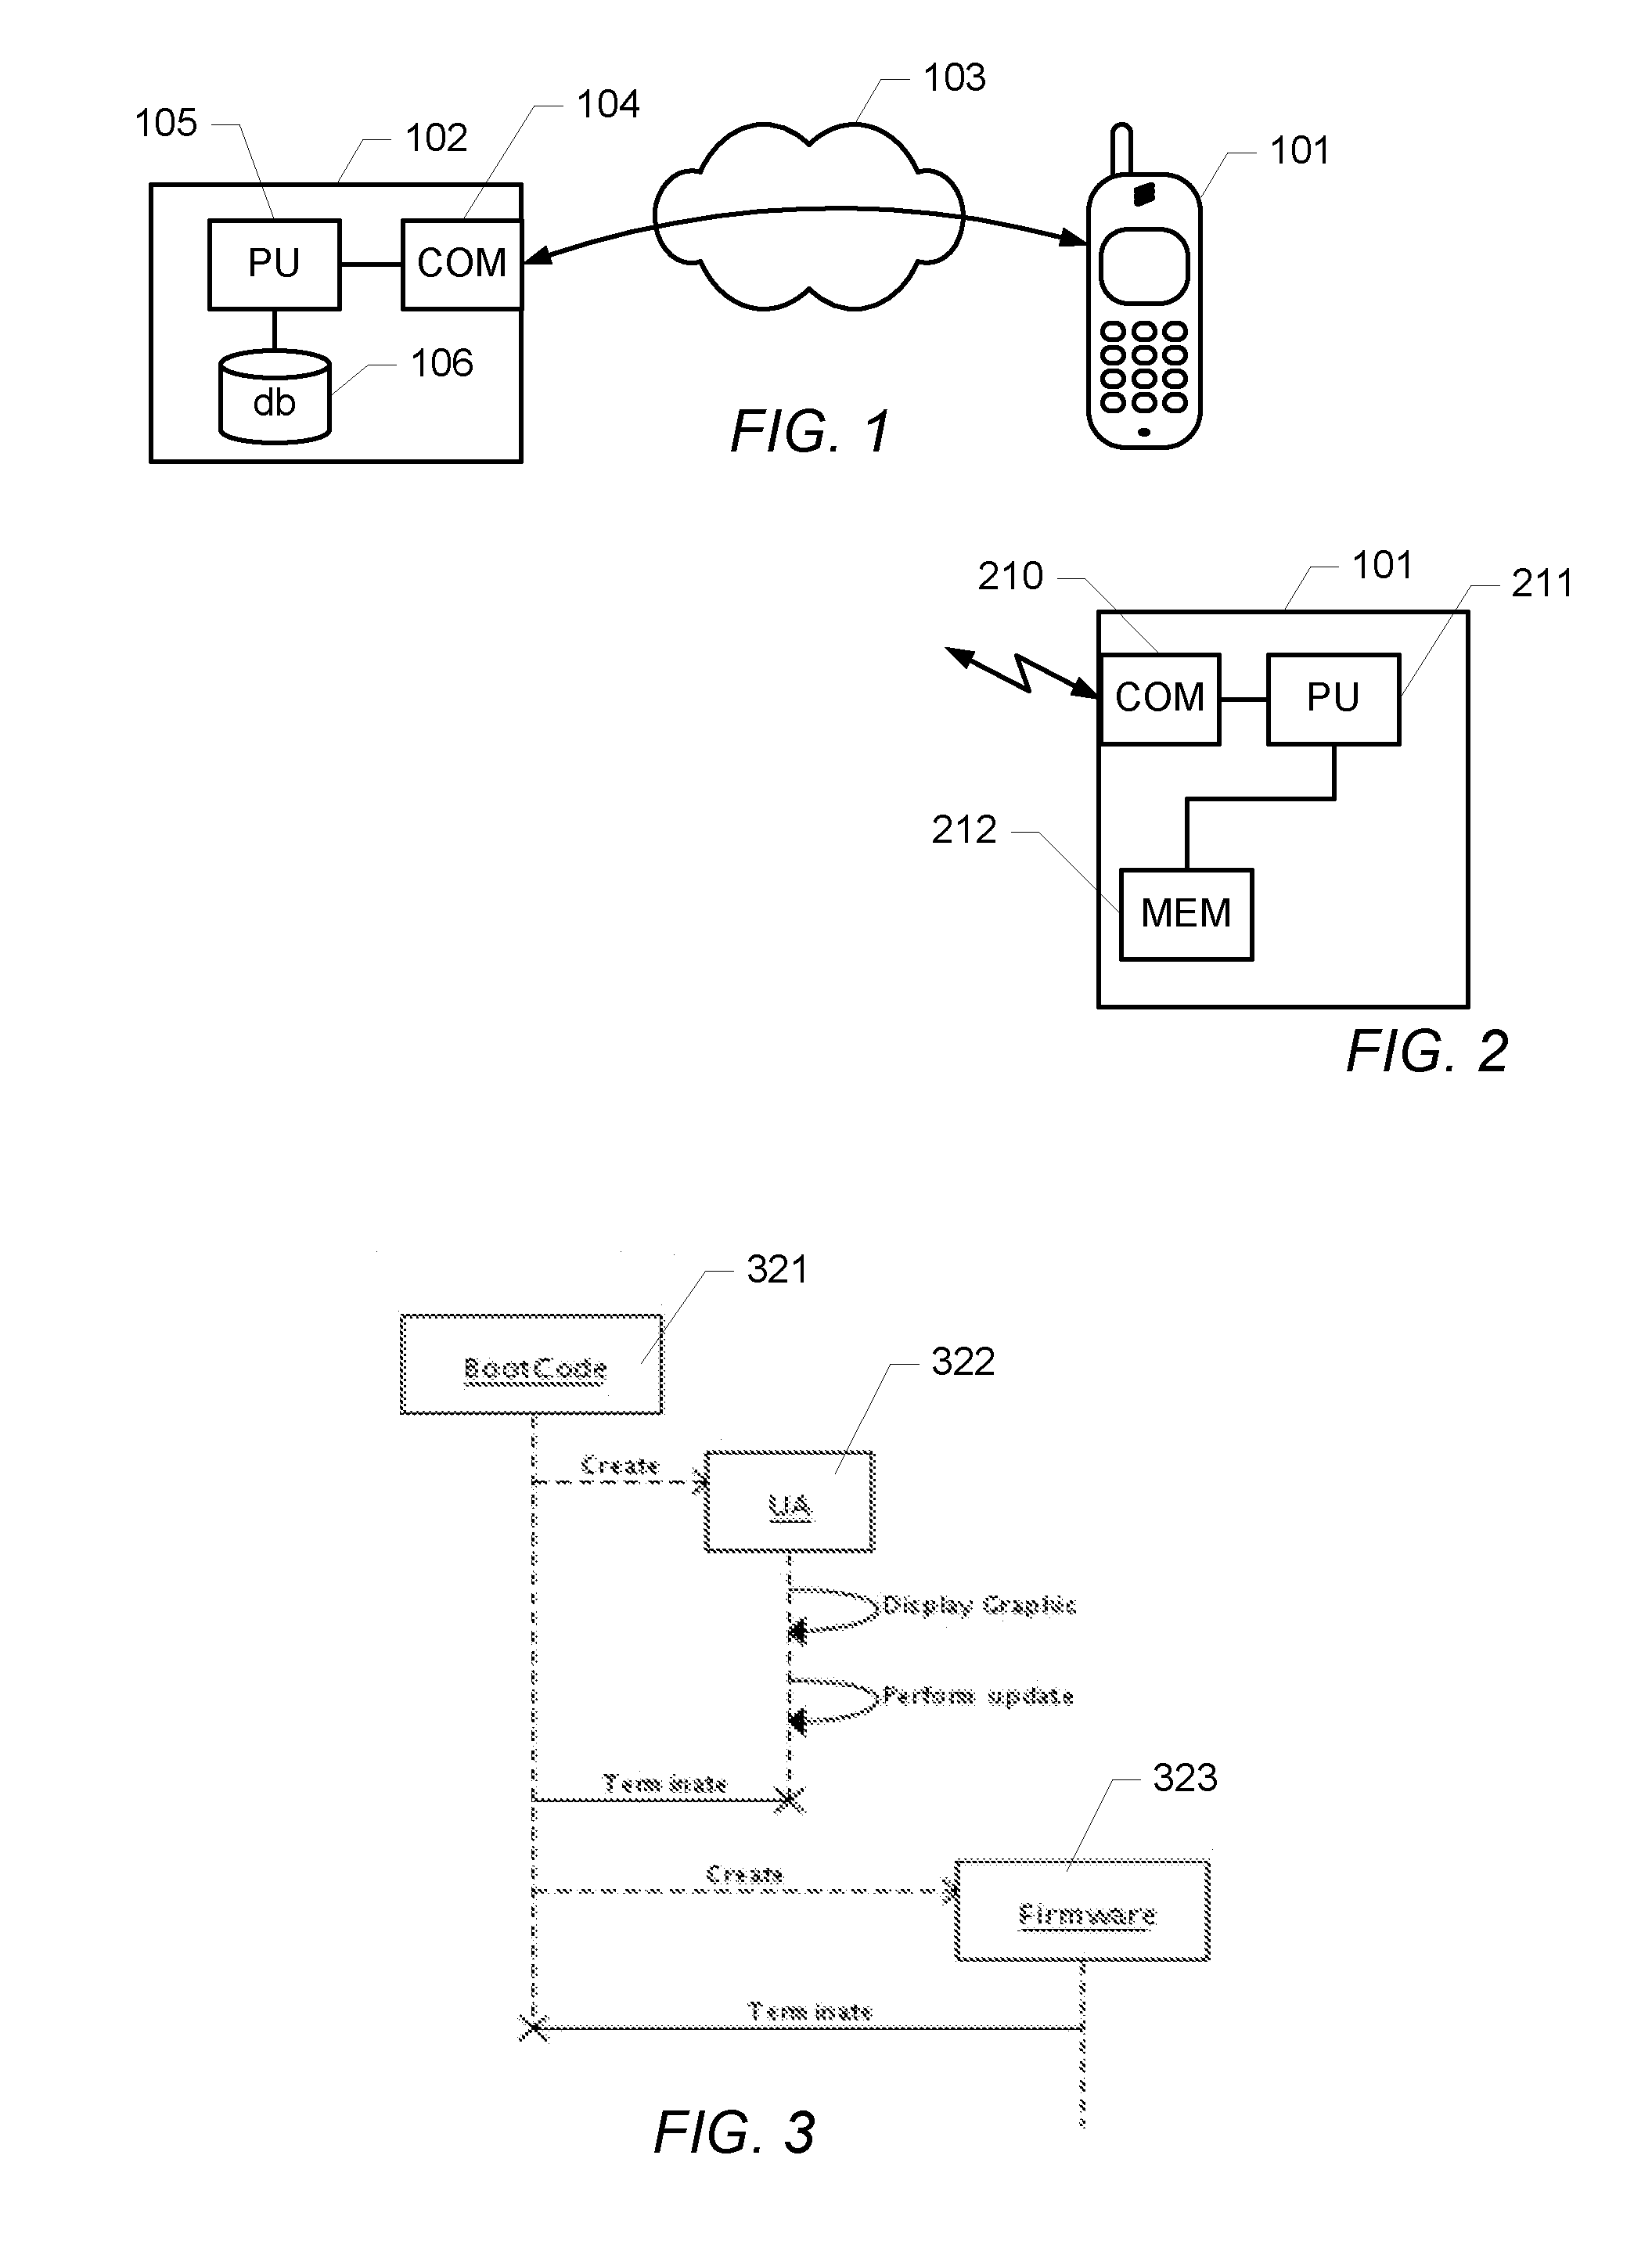 Updating Firmware of an Electronic Device